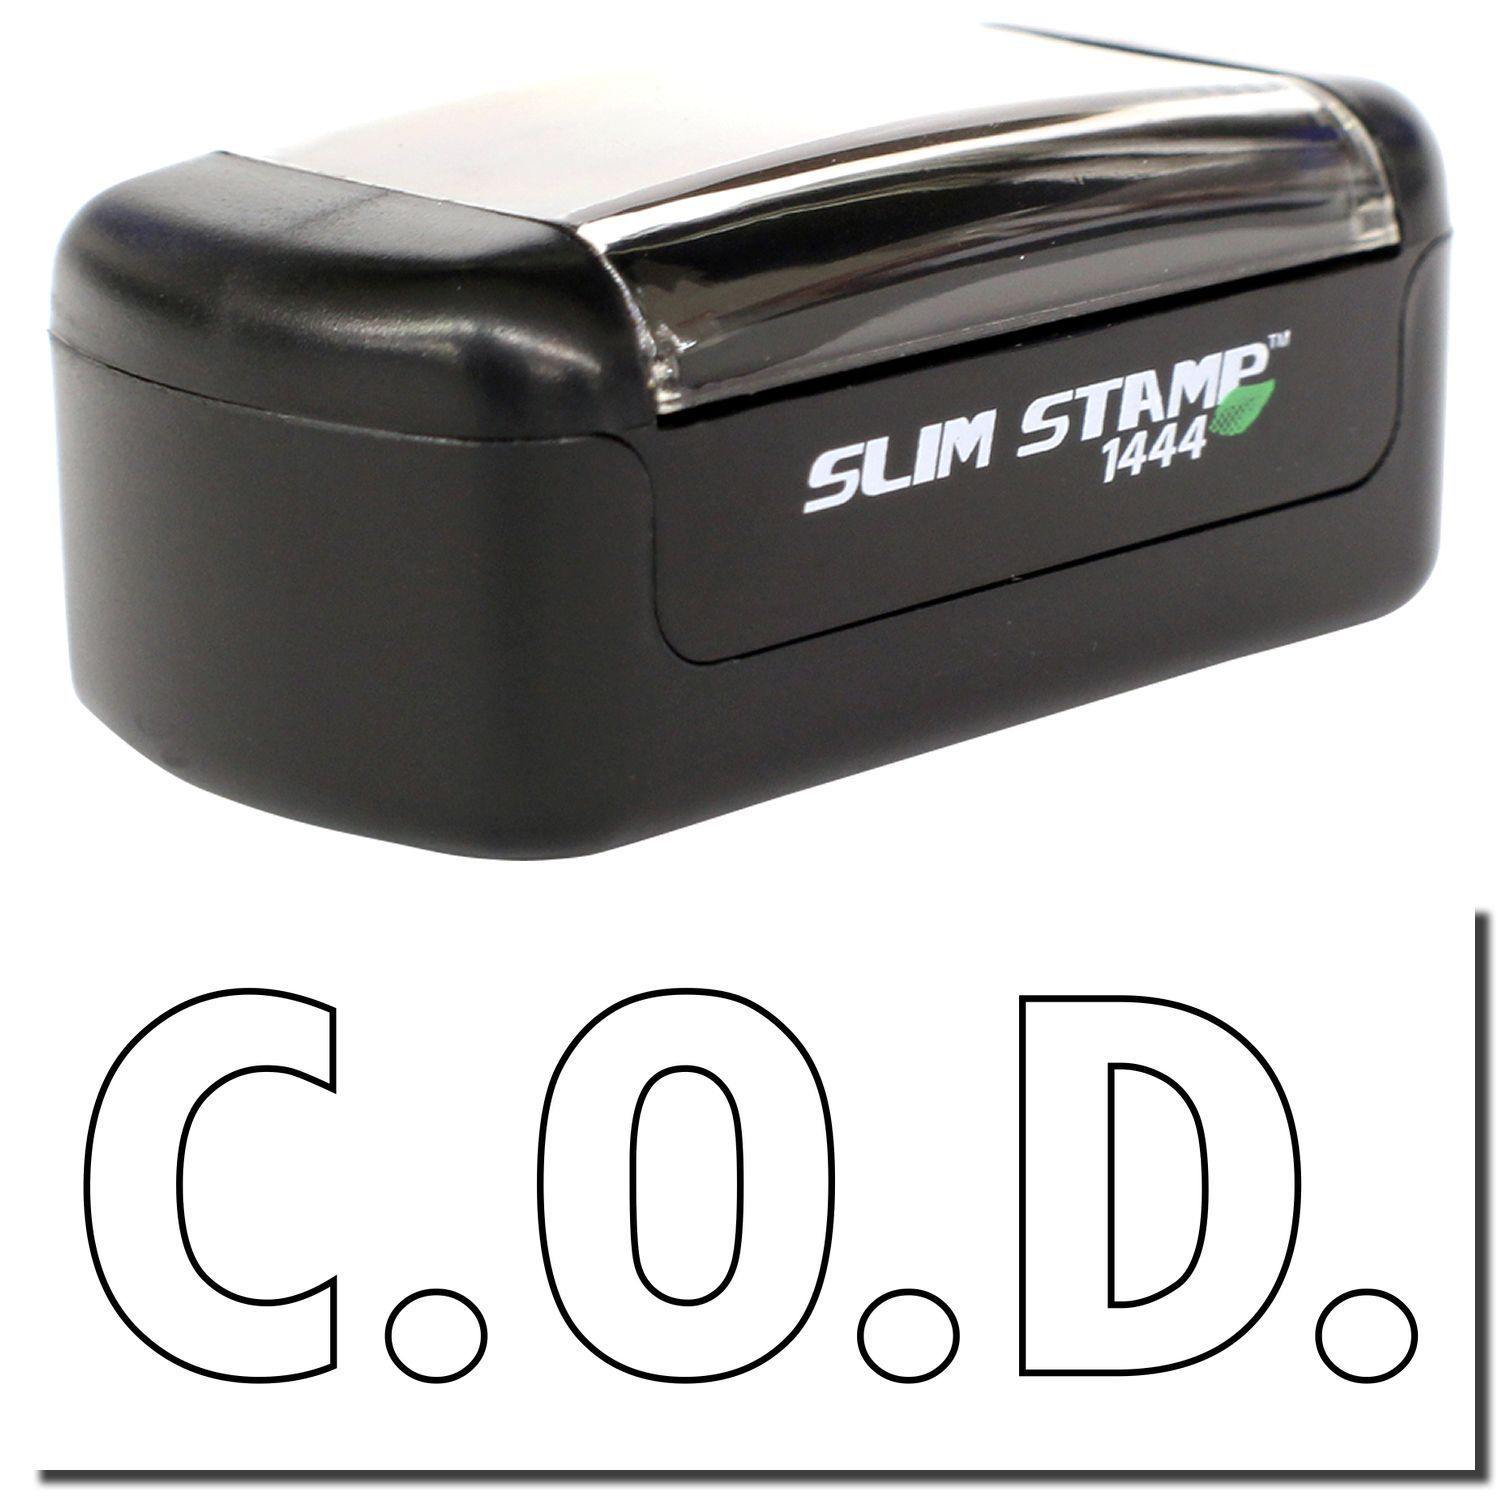 A stock office pre-inked stamp with a stamped image showing how the text "C.O.D." in an outline style is displayed after stamping.